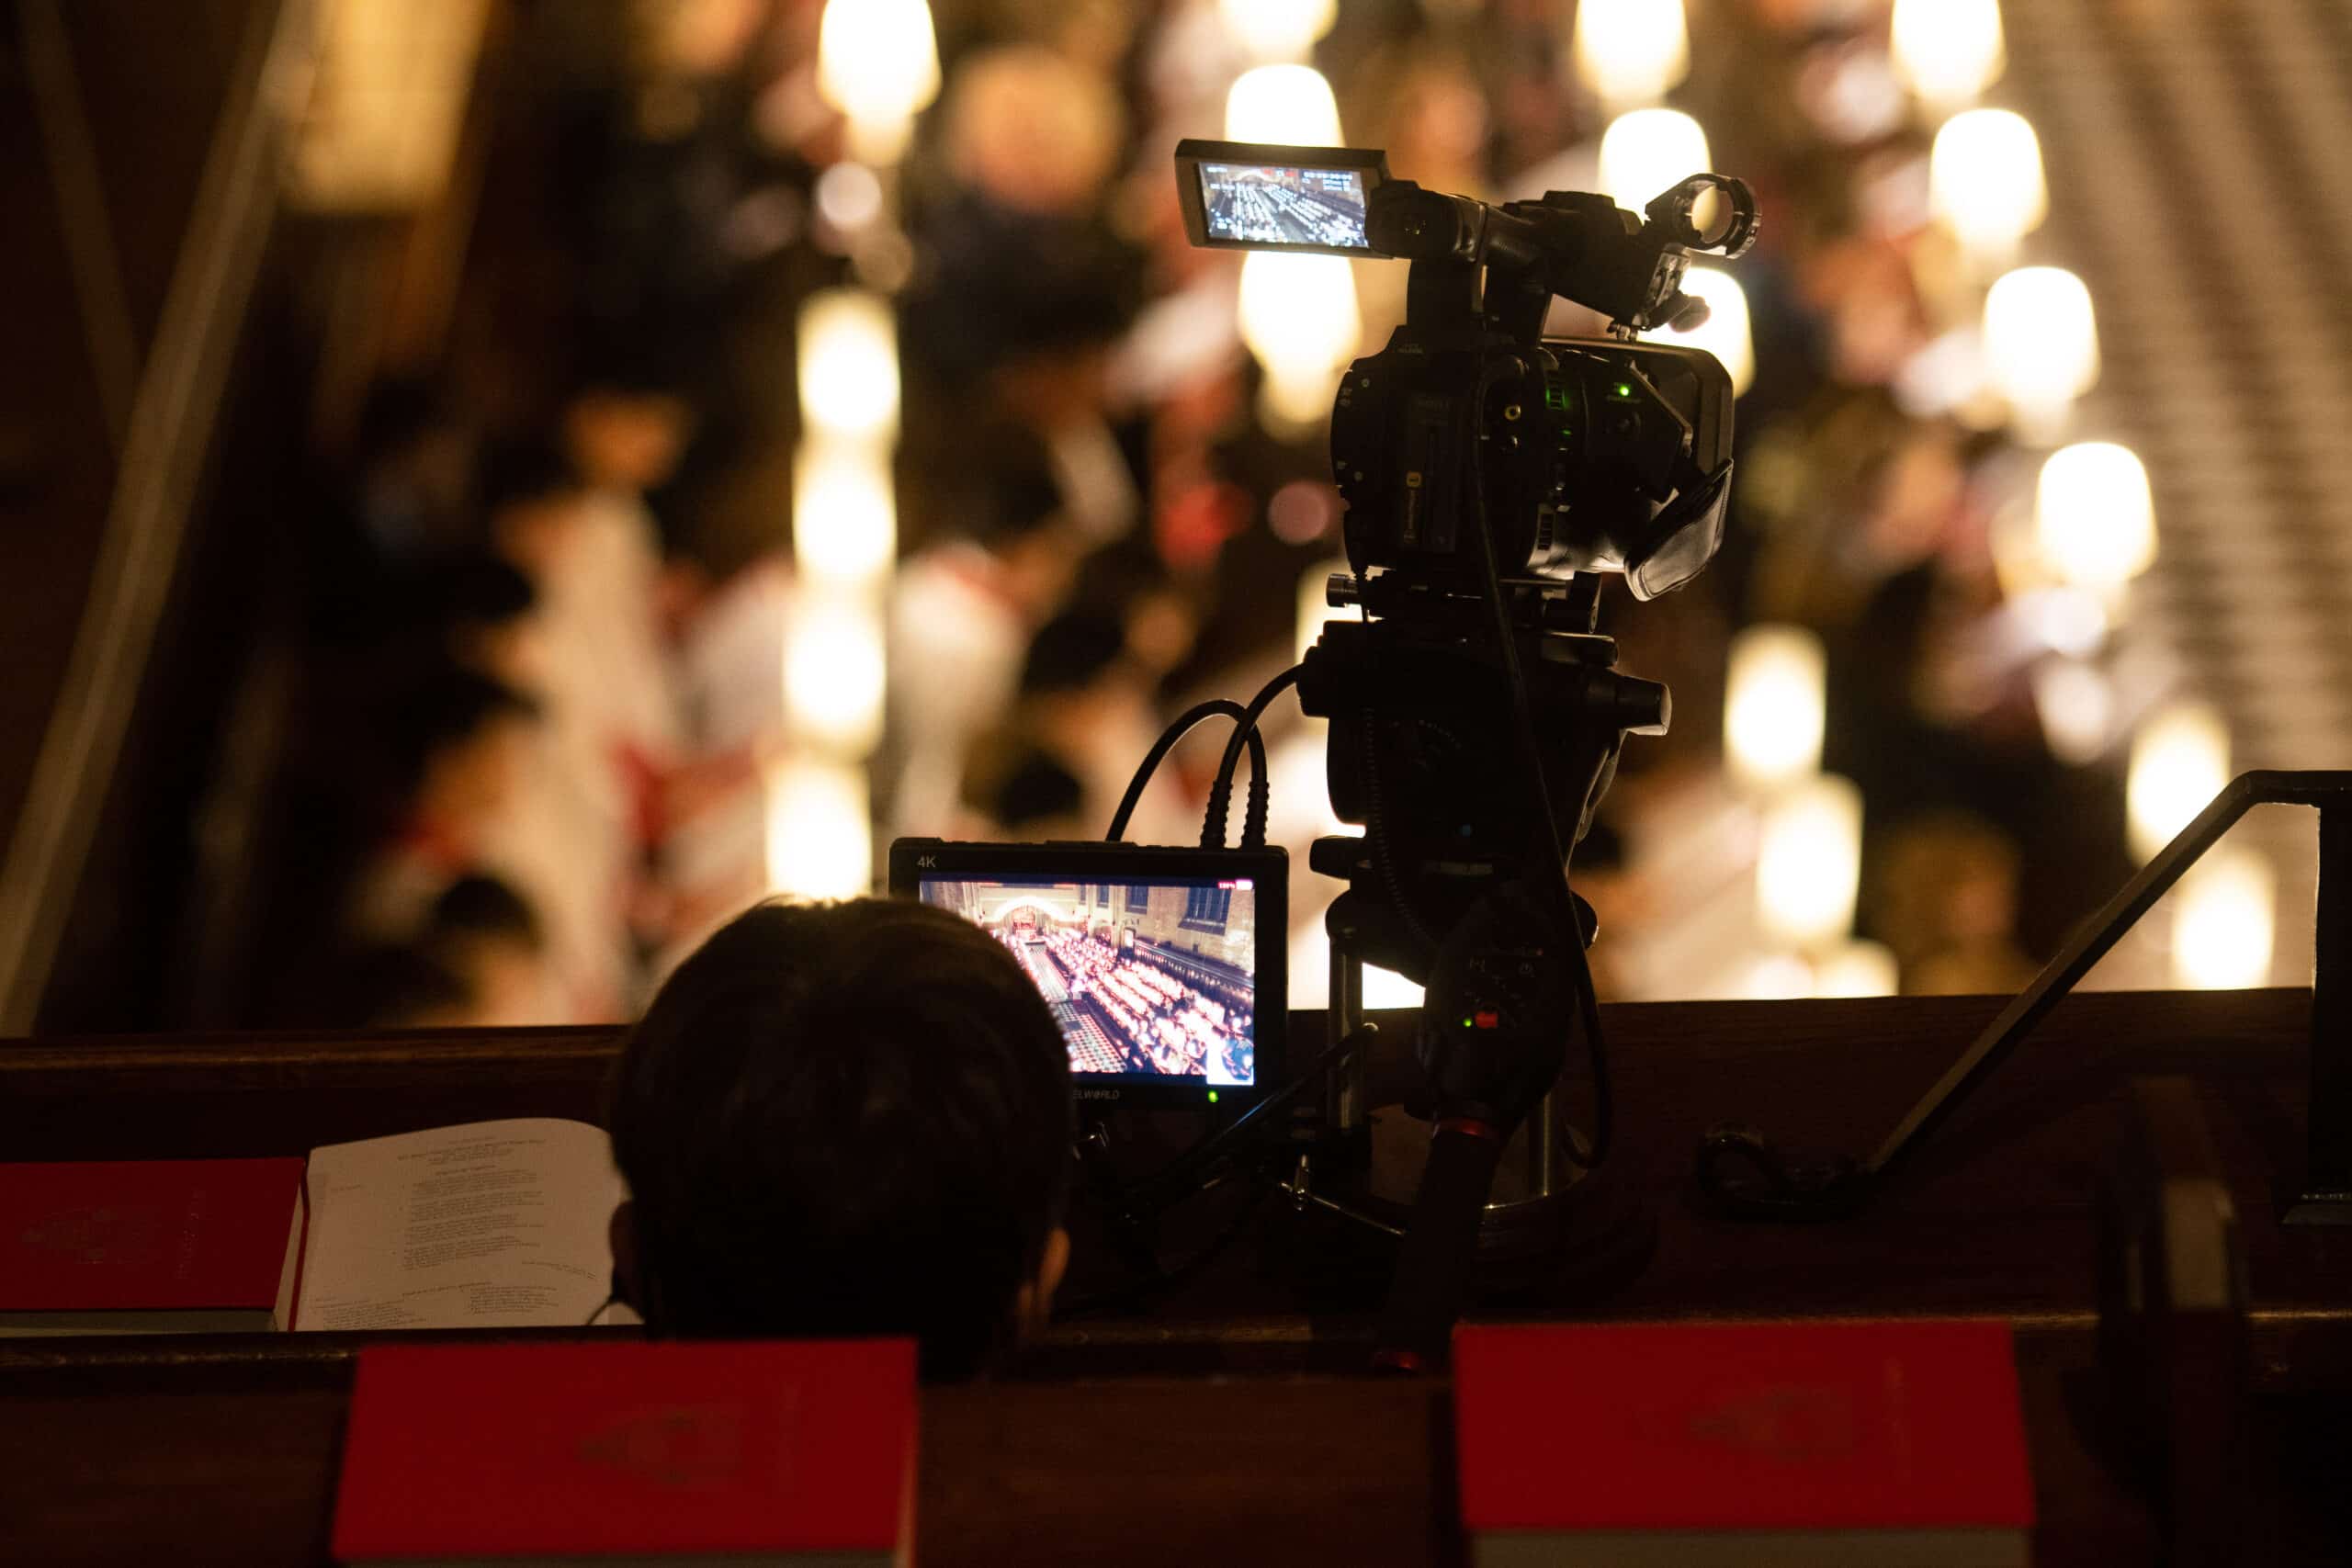 Live stream and video at Radley College